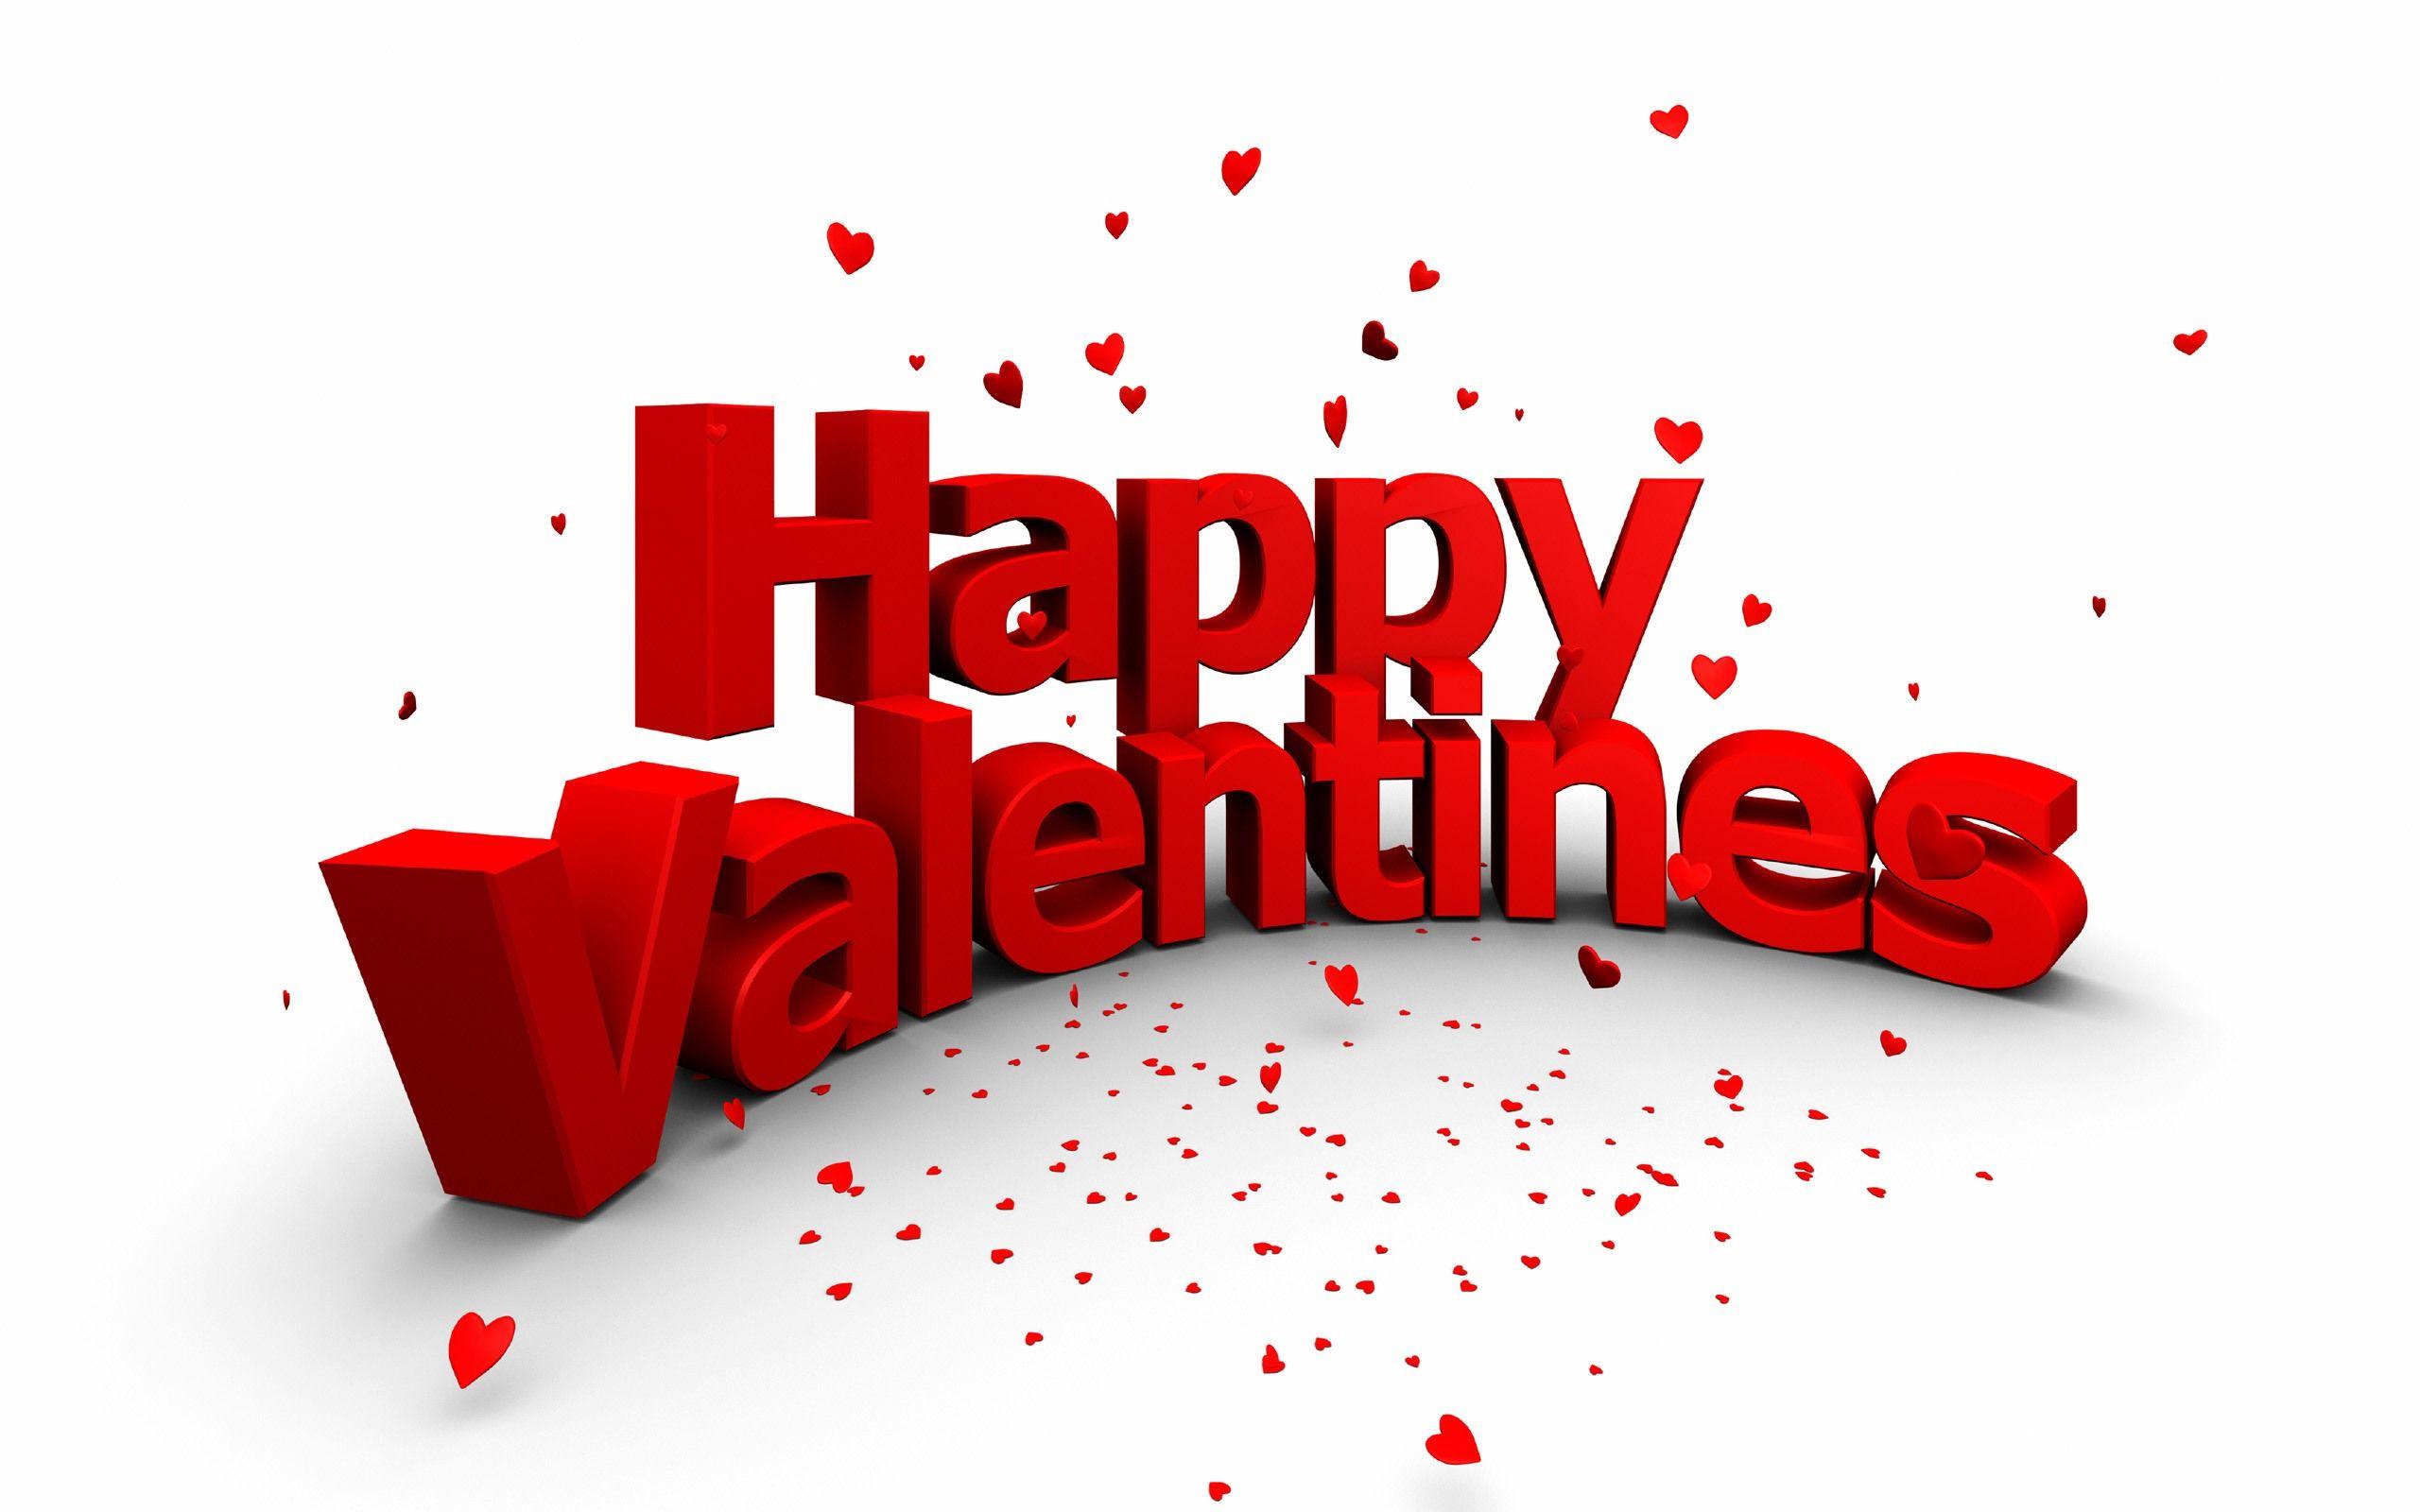 Valentines Day Wallpaper Hold Marketing. On Hold Marketing